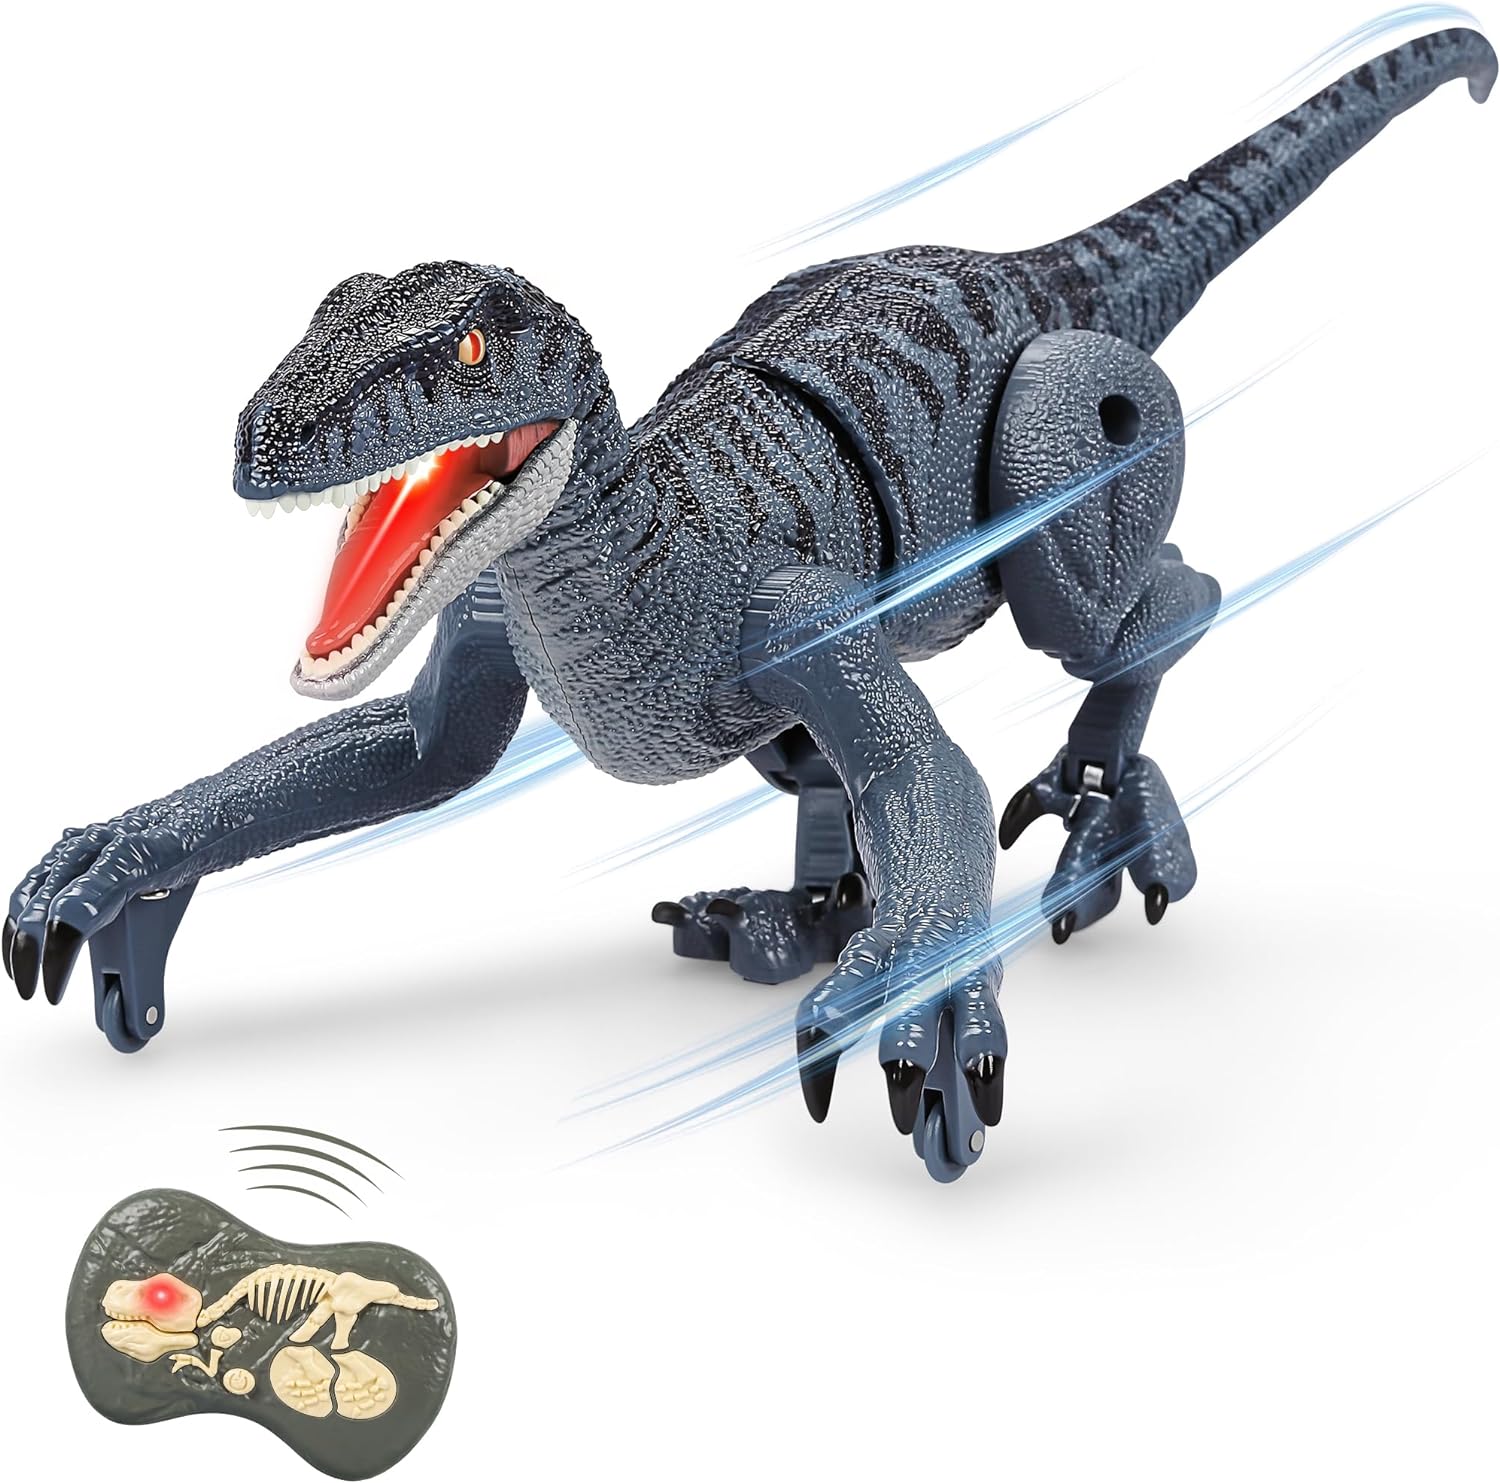 You are currently viewing CUKU Remote Control Dinosaur Review